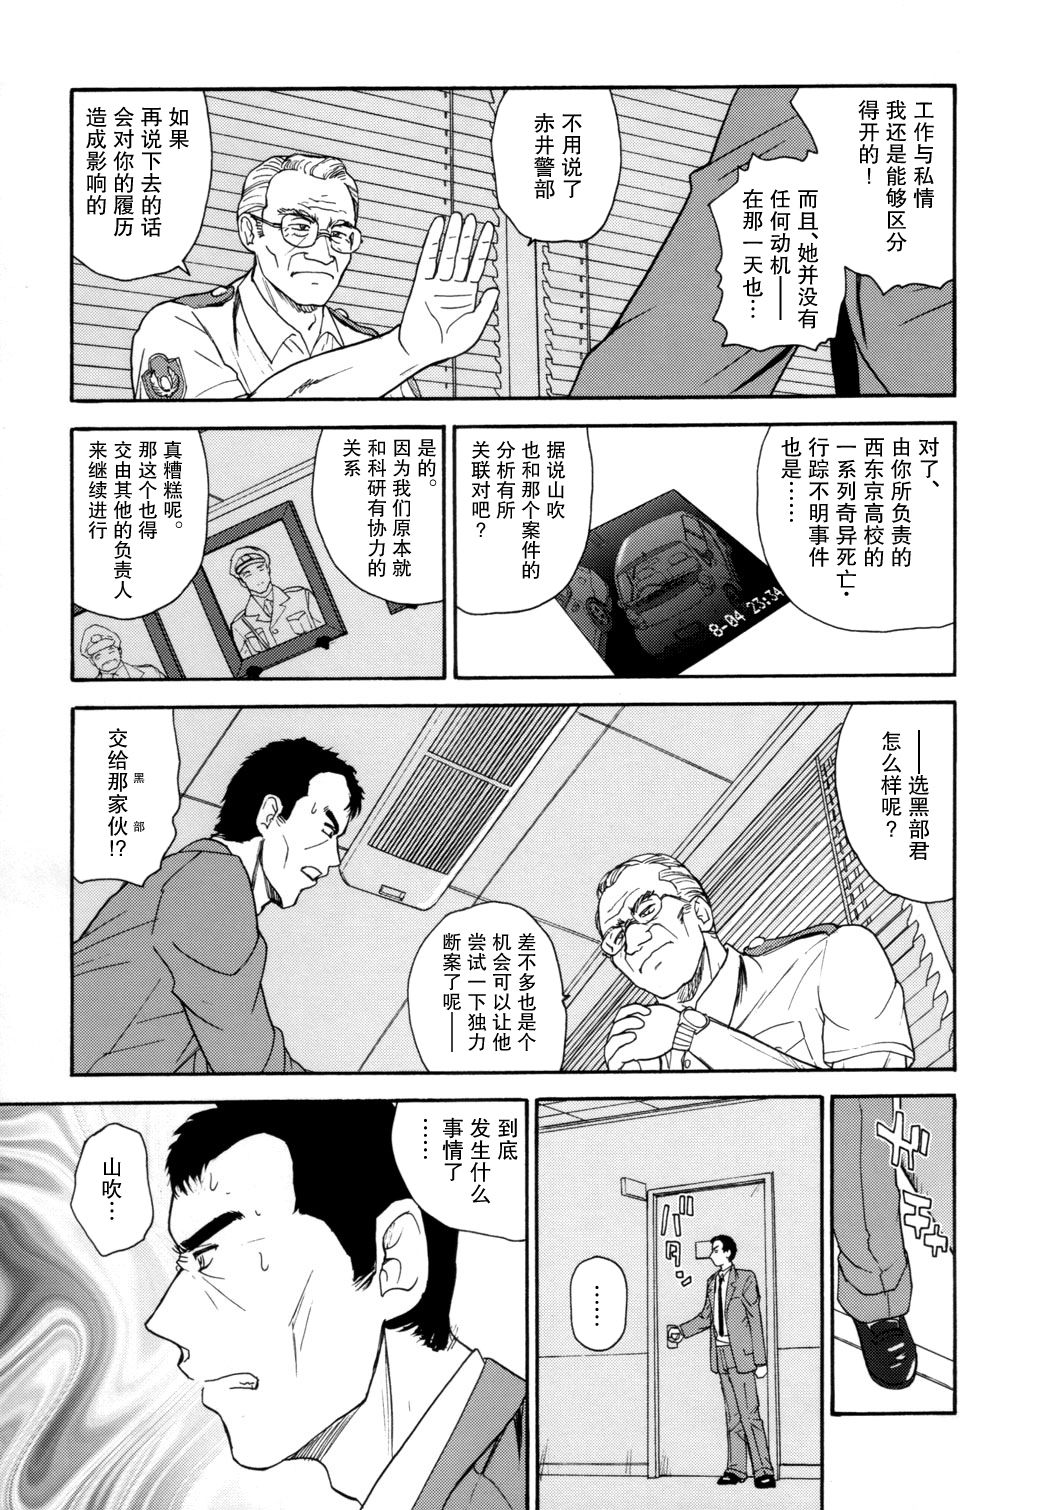 (C72) [Behind Moon (Q)] Dulce Report 9 | 达西报告 9 [Chinese] [哈尼喵汉化组] [Decensored] page 33 full